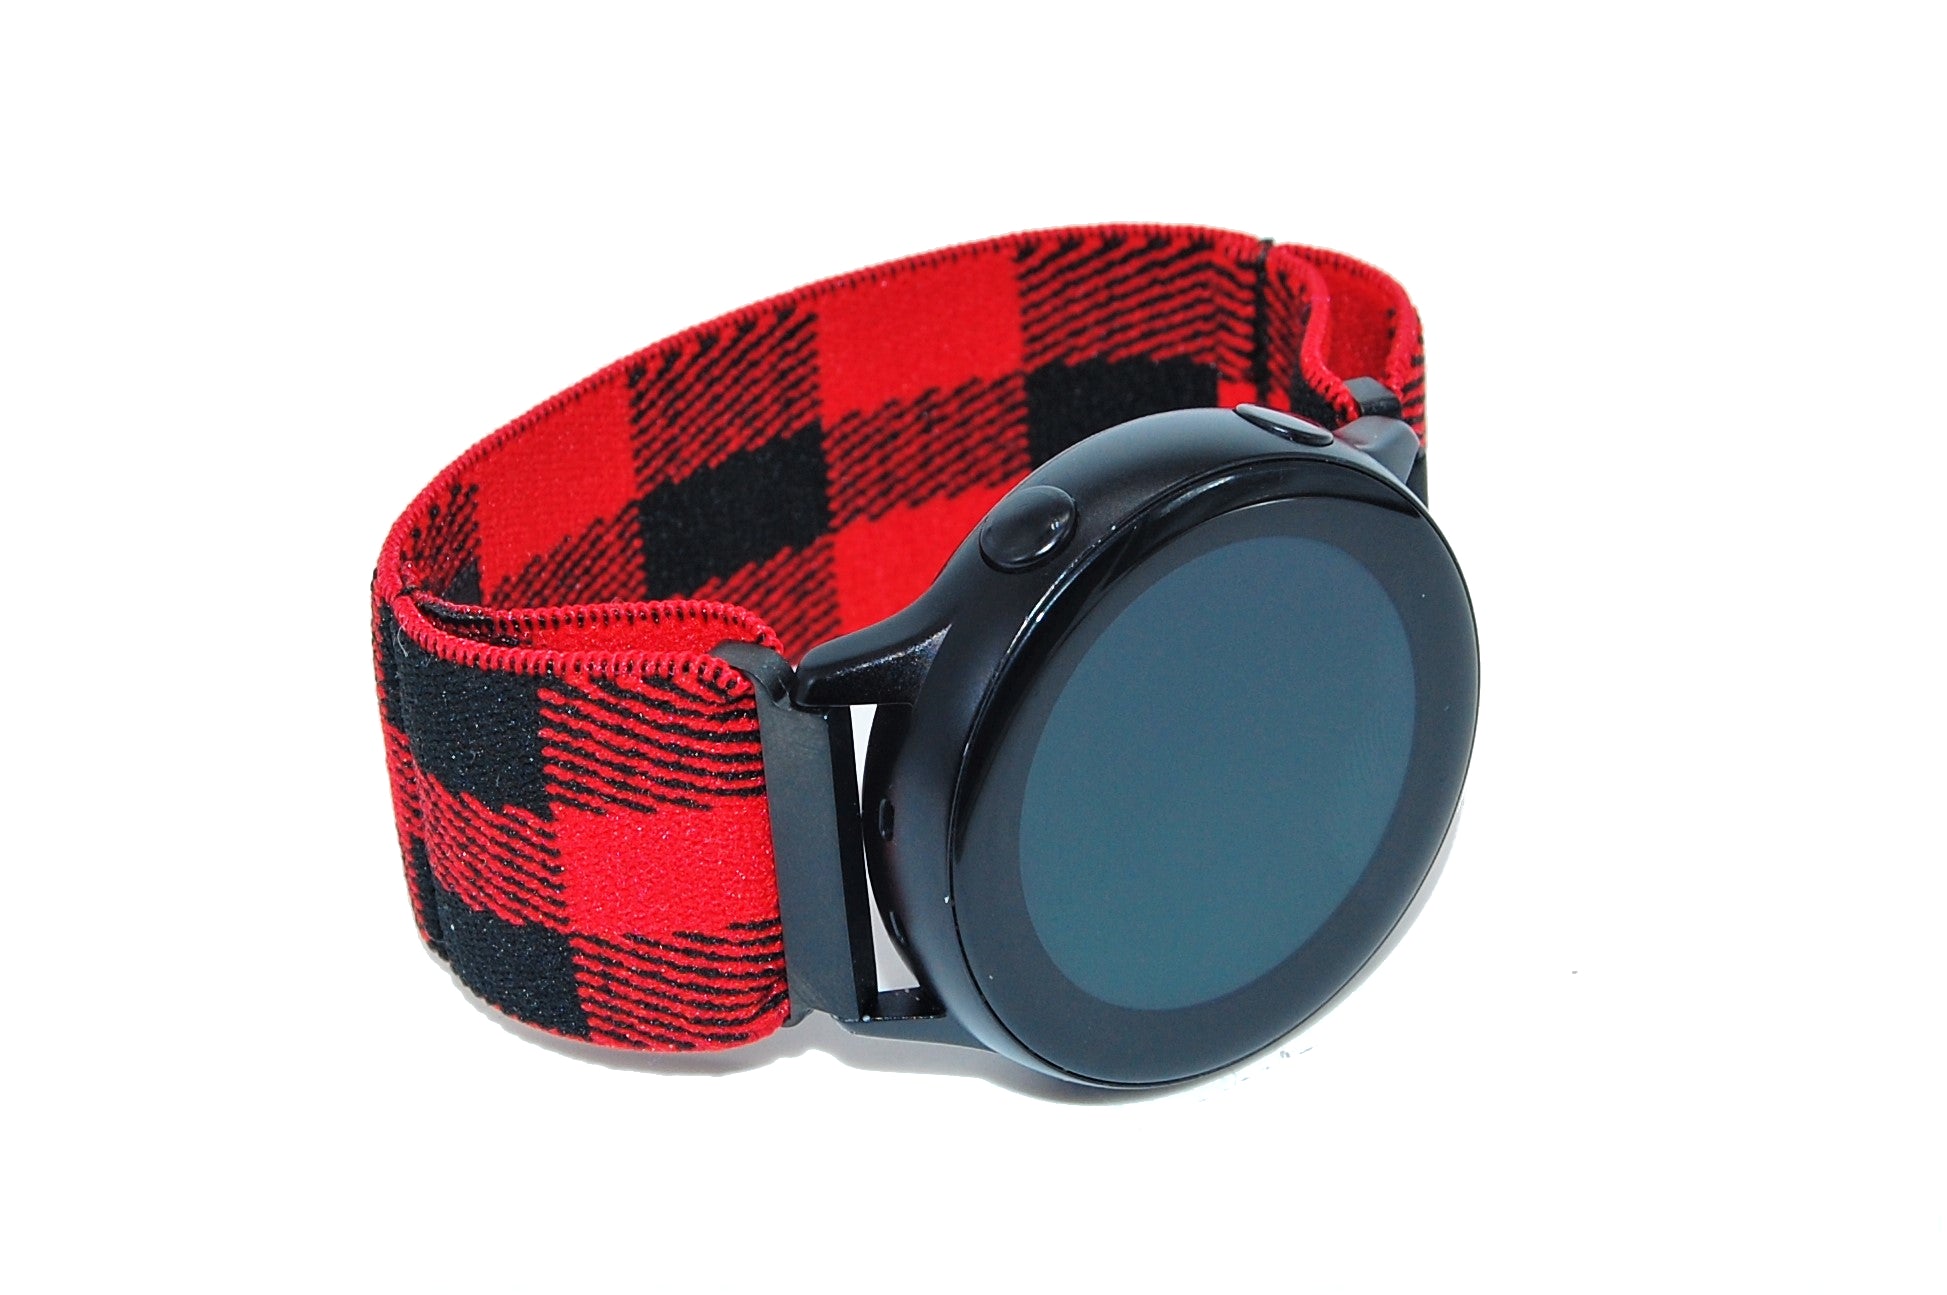 Elastic Strap for Watches with A 22mm Lug Width - Black / Red, M